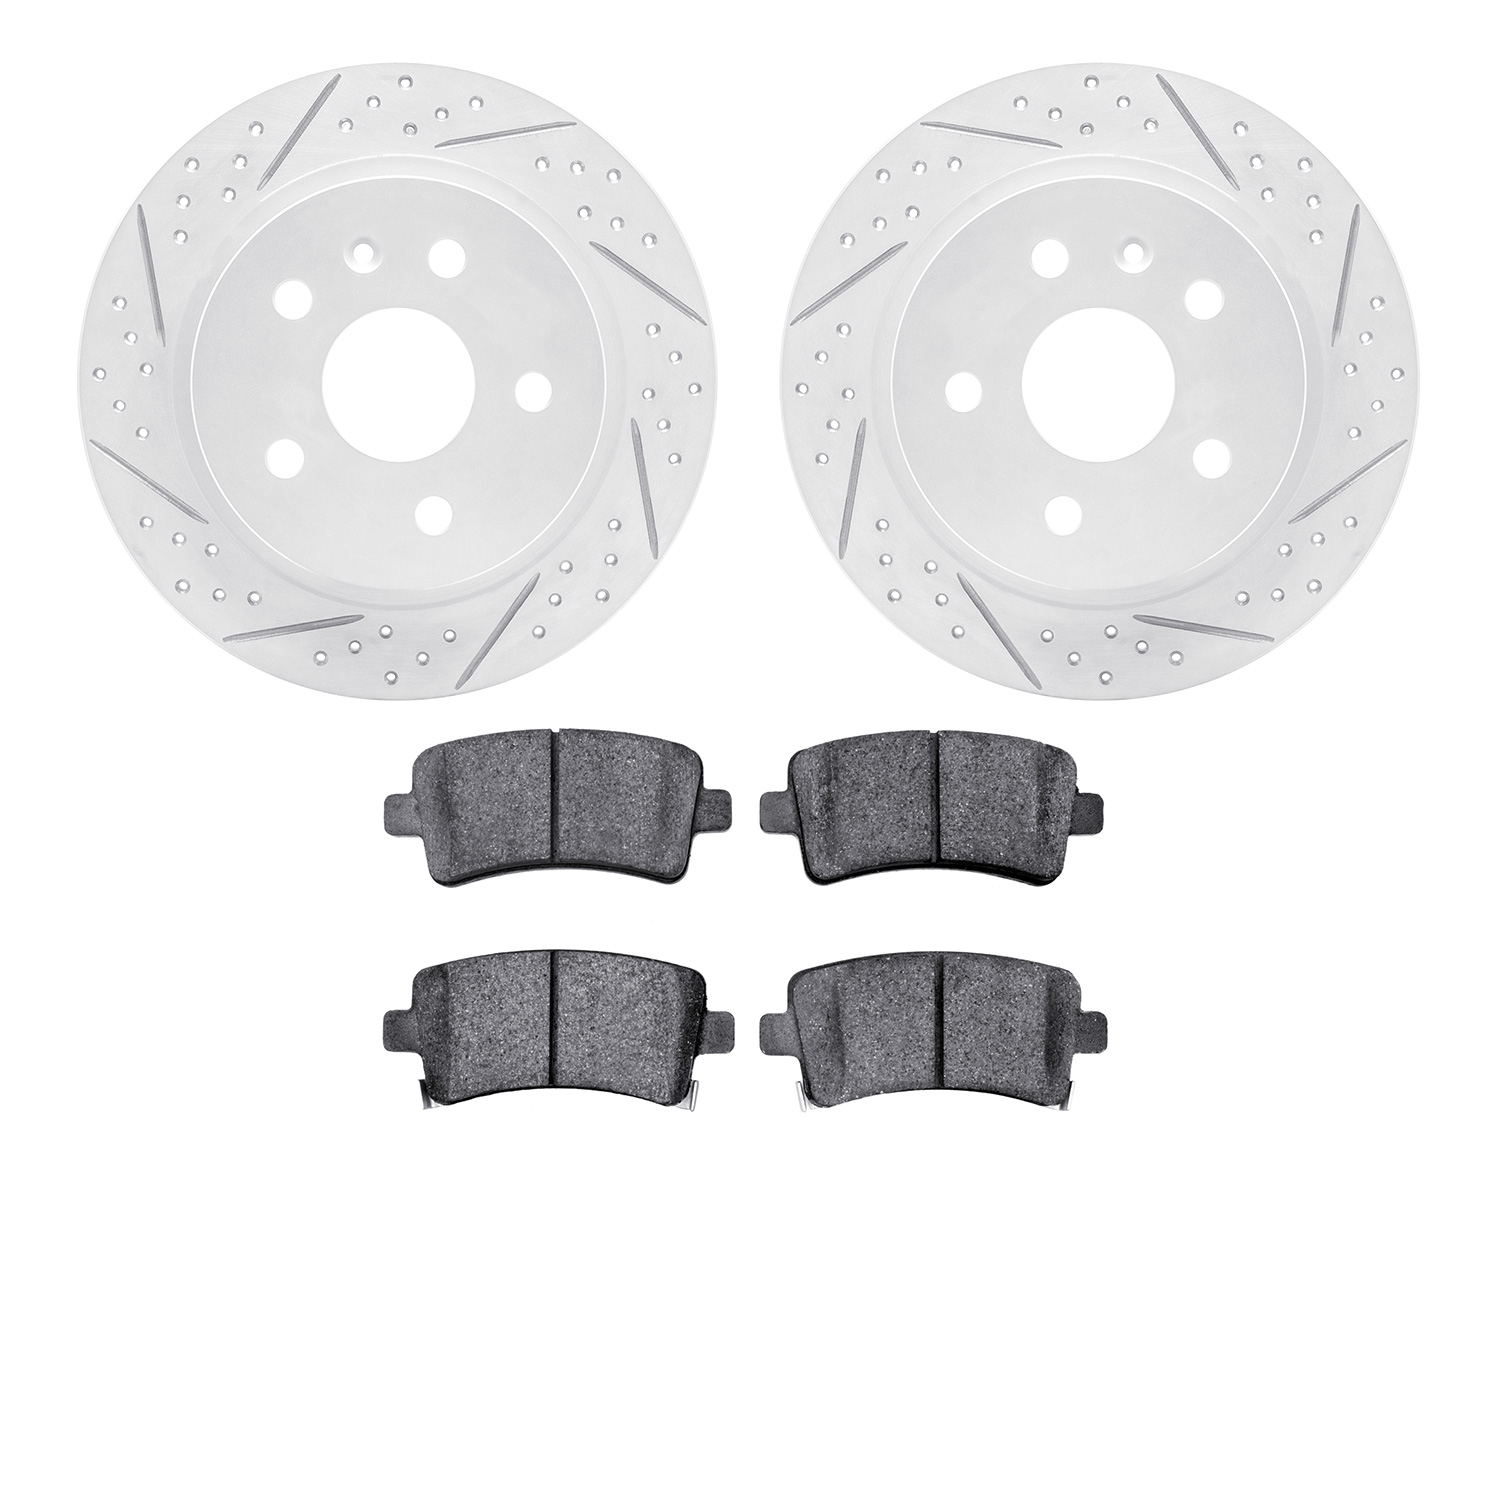 2502-45015 Geoperformance Drilled/Slotted Rotors w/5000 Advanced Brake Pads Kit, 2011-2016 GM, Position: Rear